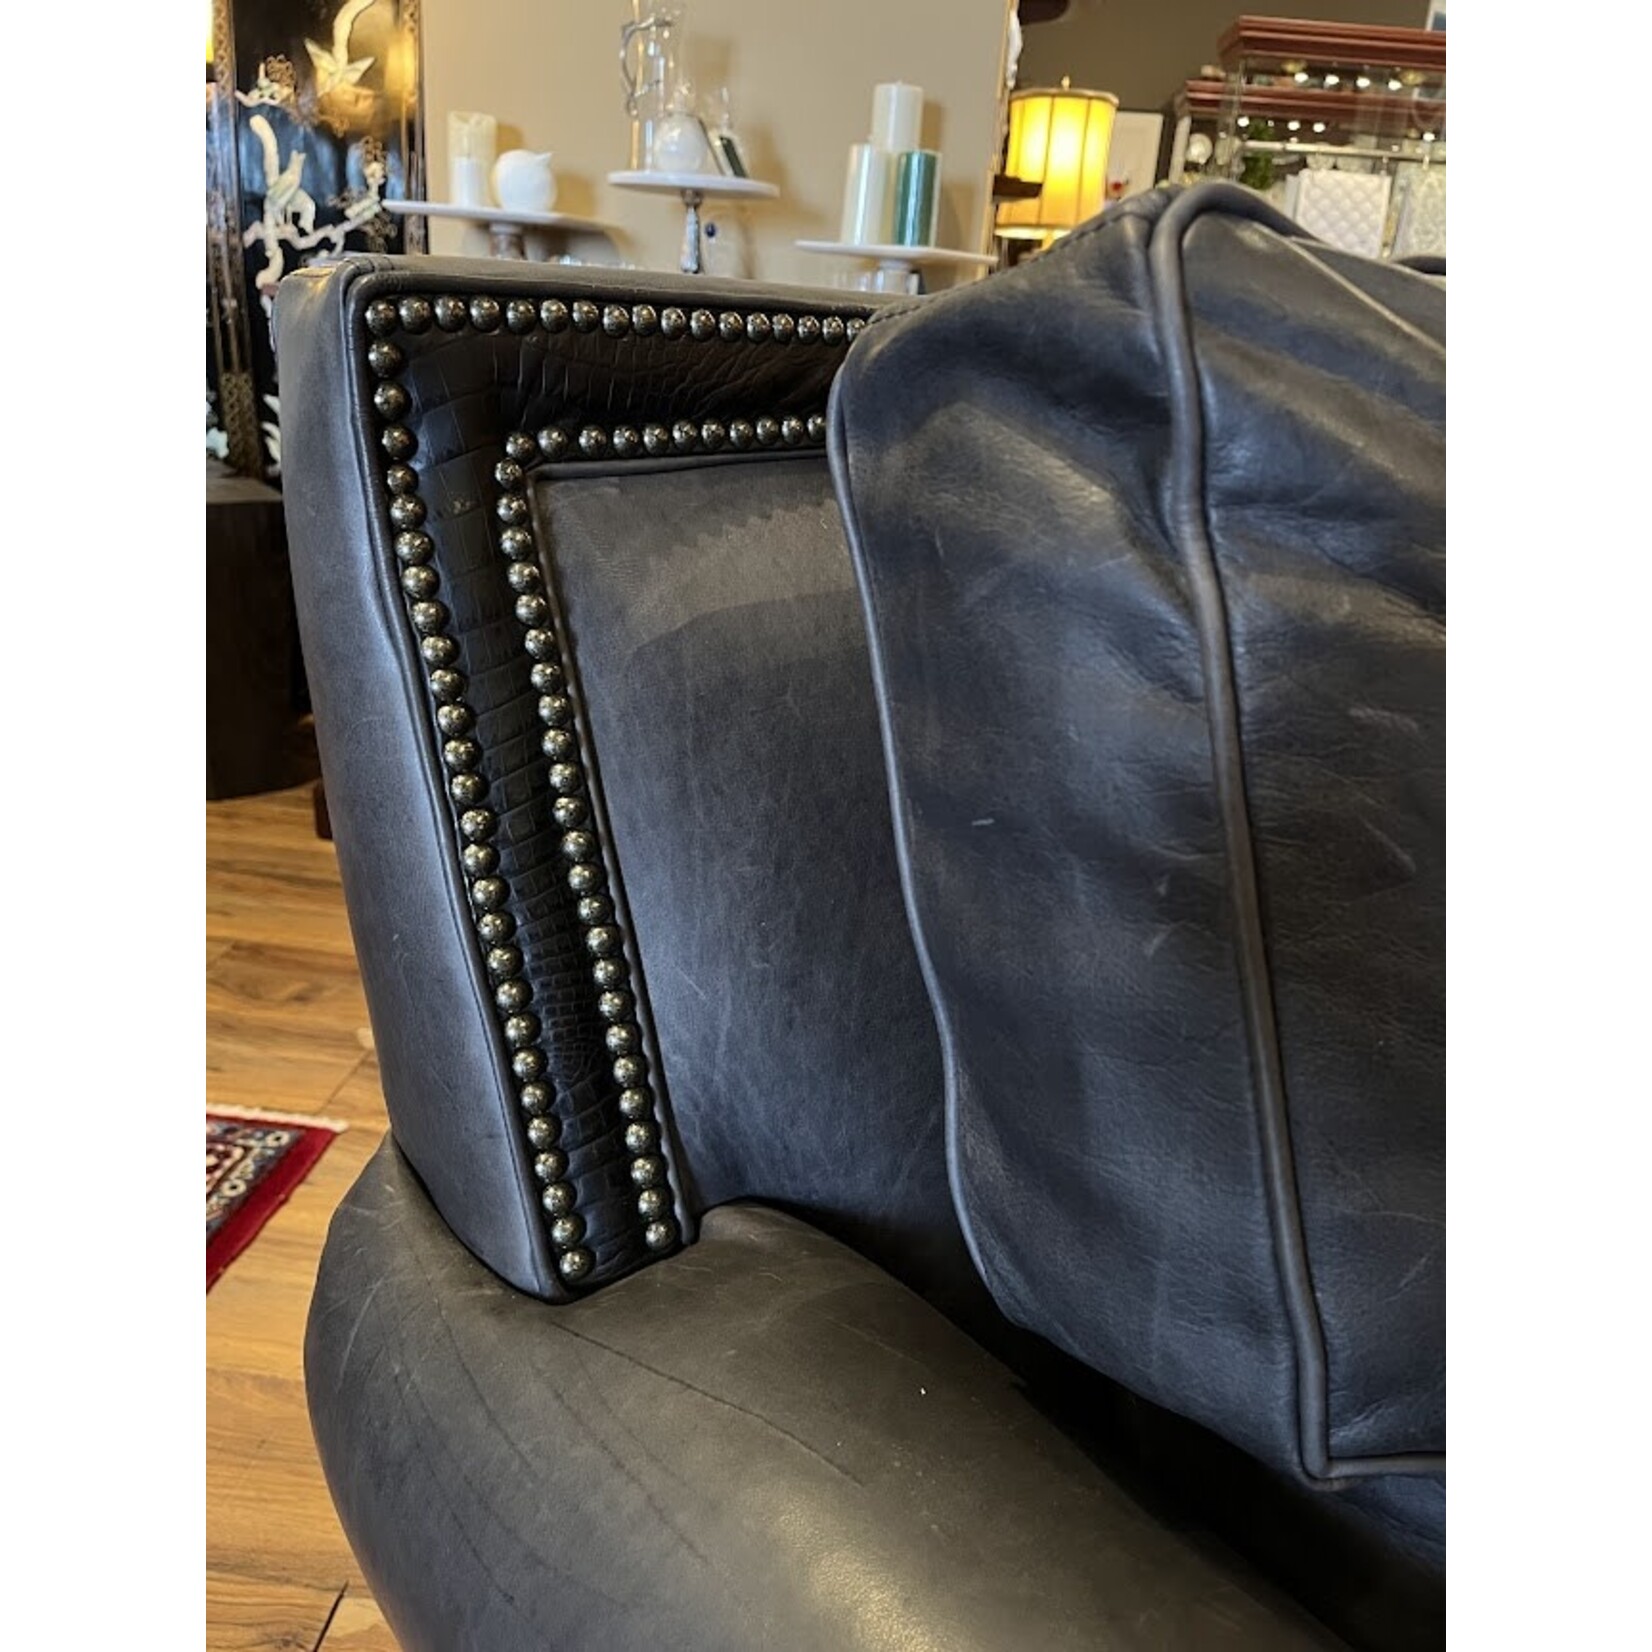 Our House Designs Finsbury Sofa Journey Charcoal Leather